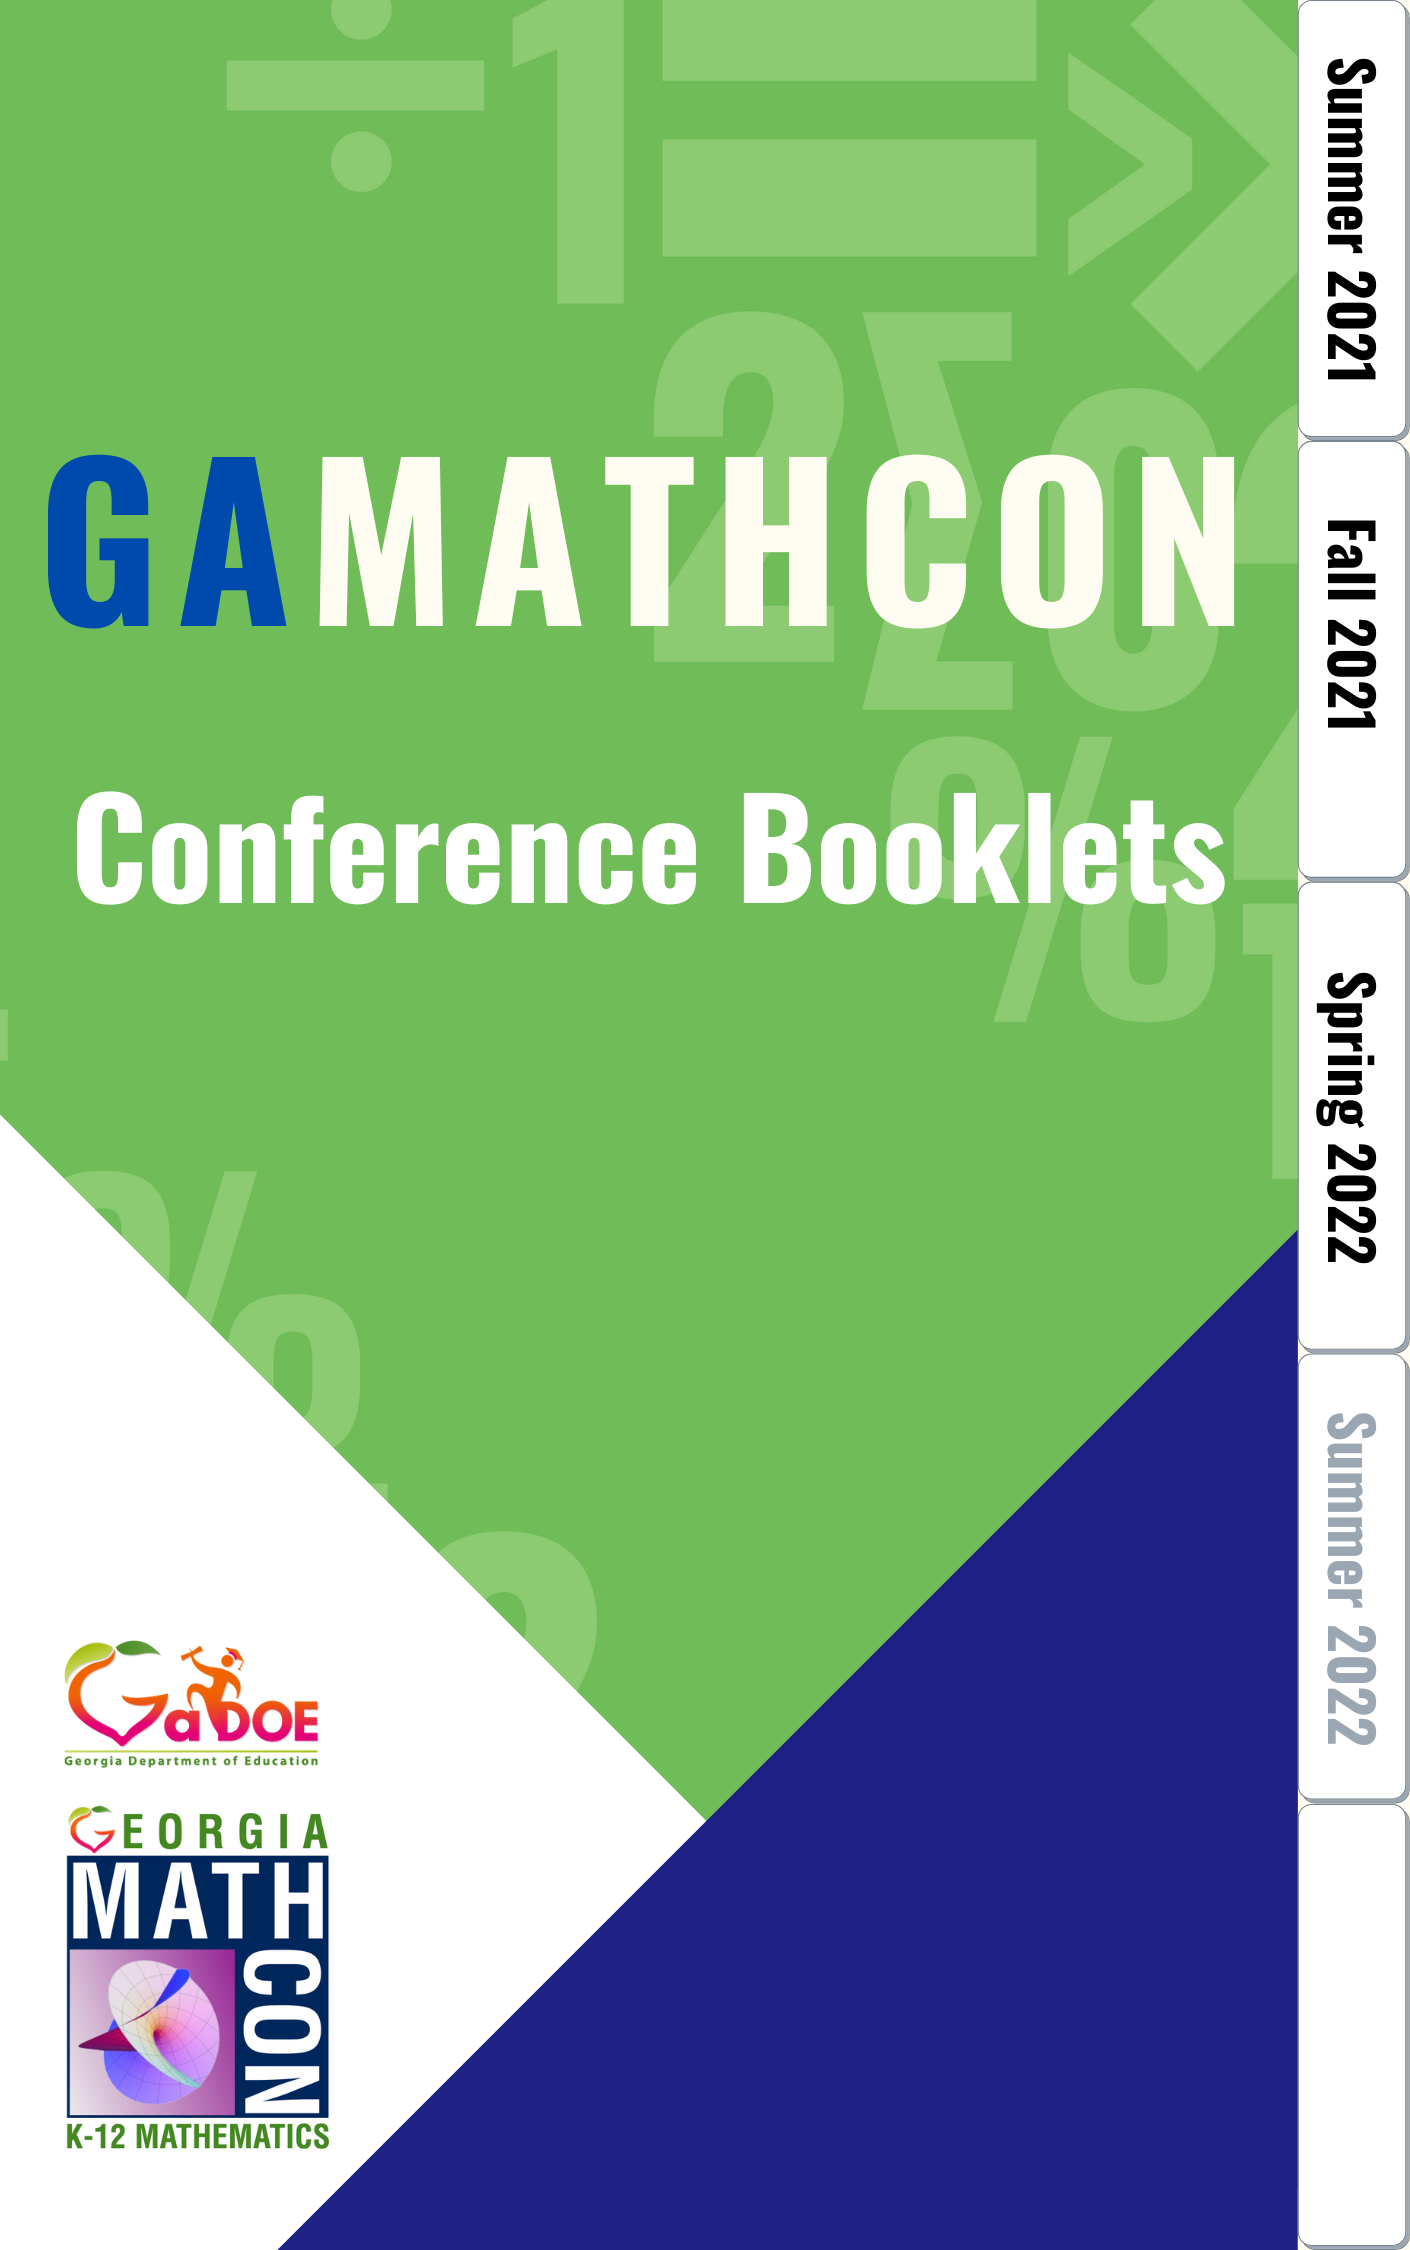 Conference Booklet.png